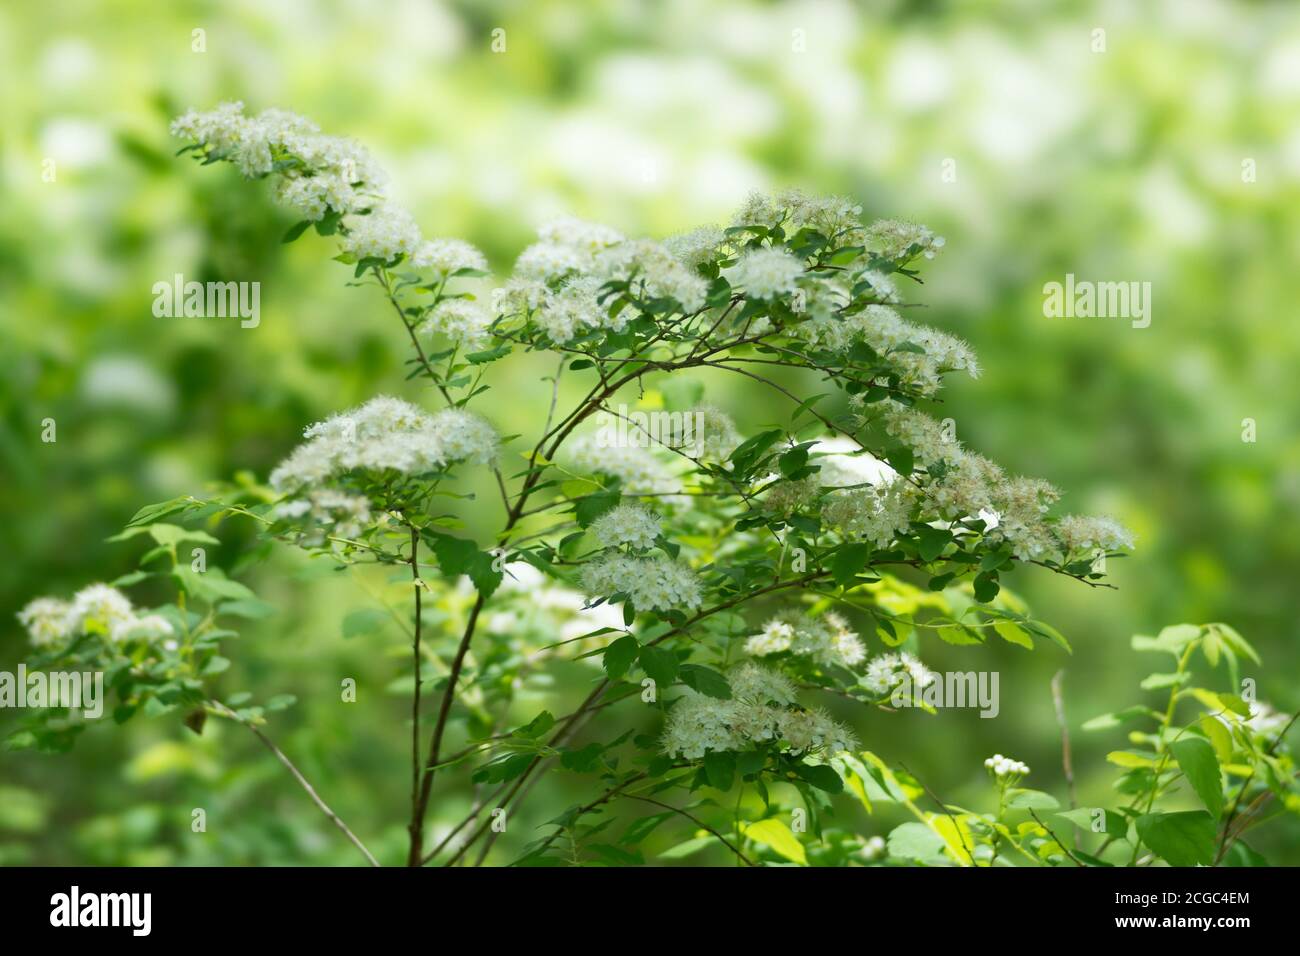 Blooming branch of wild white spiraea  (Spiraea chamaedryfolia) in a forest illuminated by the sun. Stock Photo